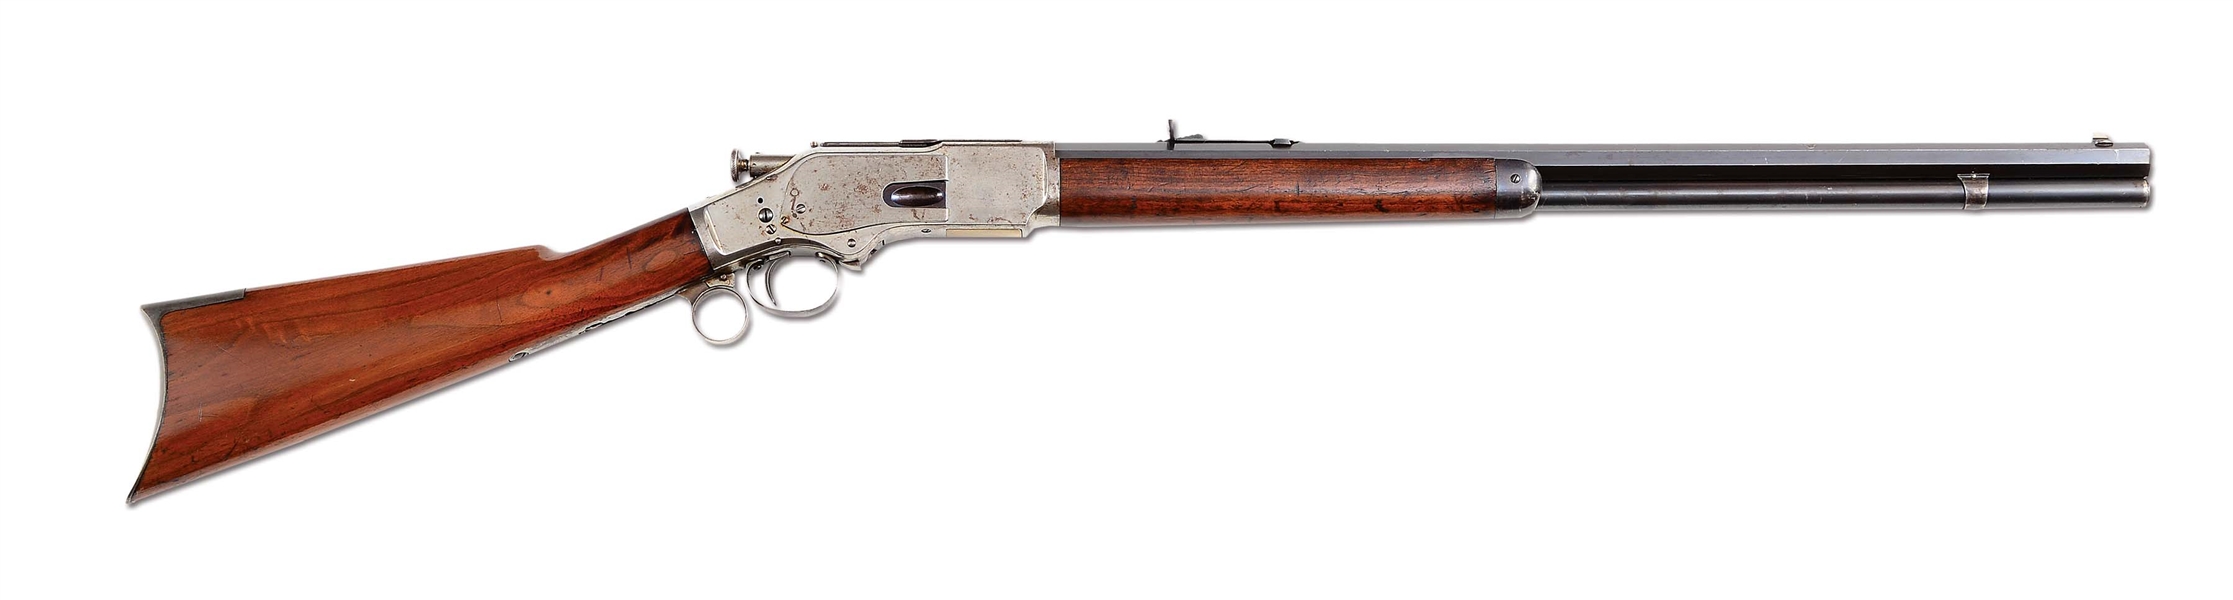 (A) RARE EXPERIMENTAL 1873 RING LEVER RIFLE WITH INTERNAL STRIKER.